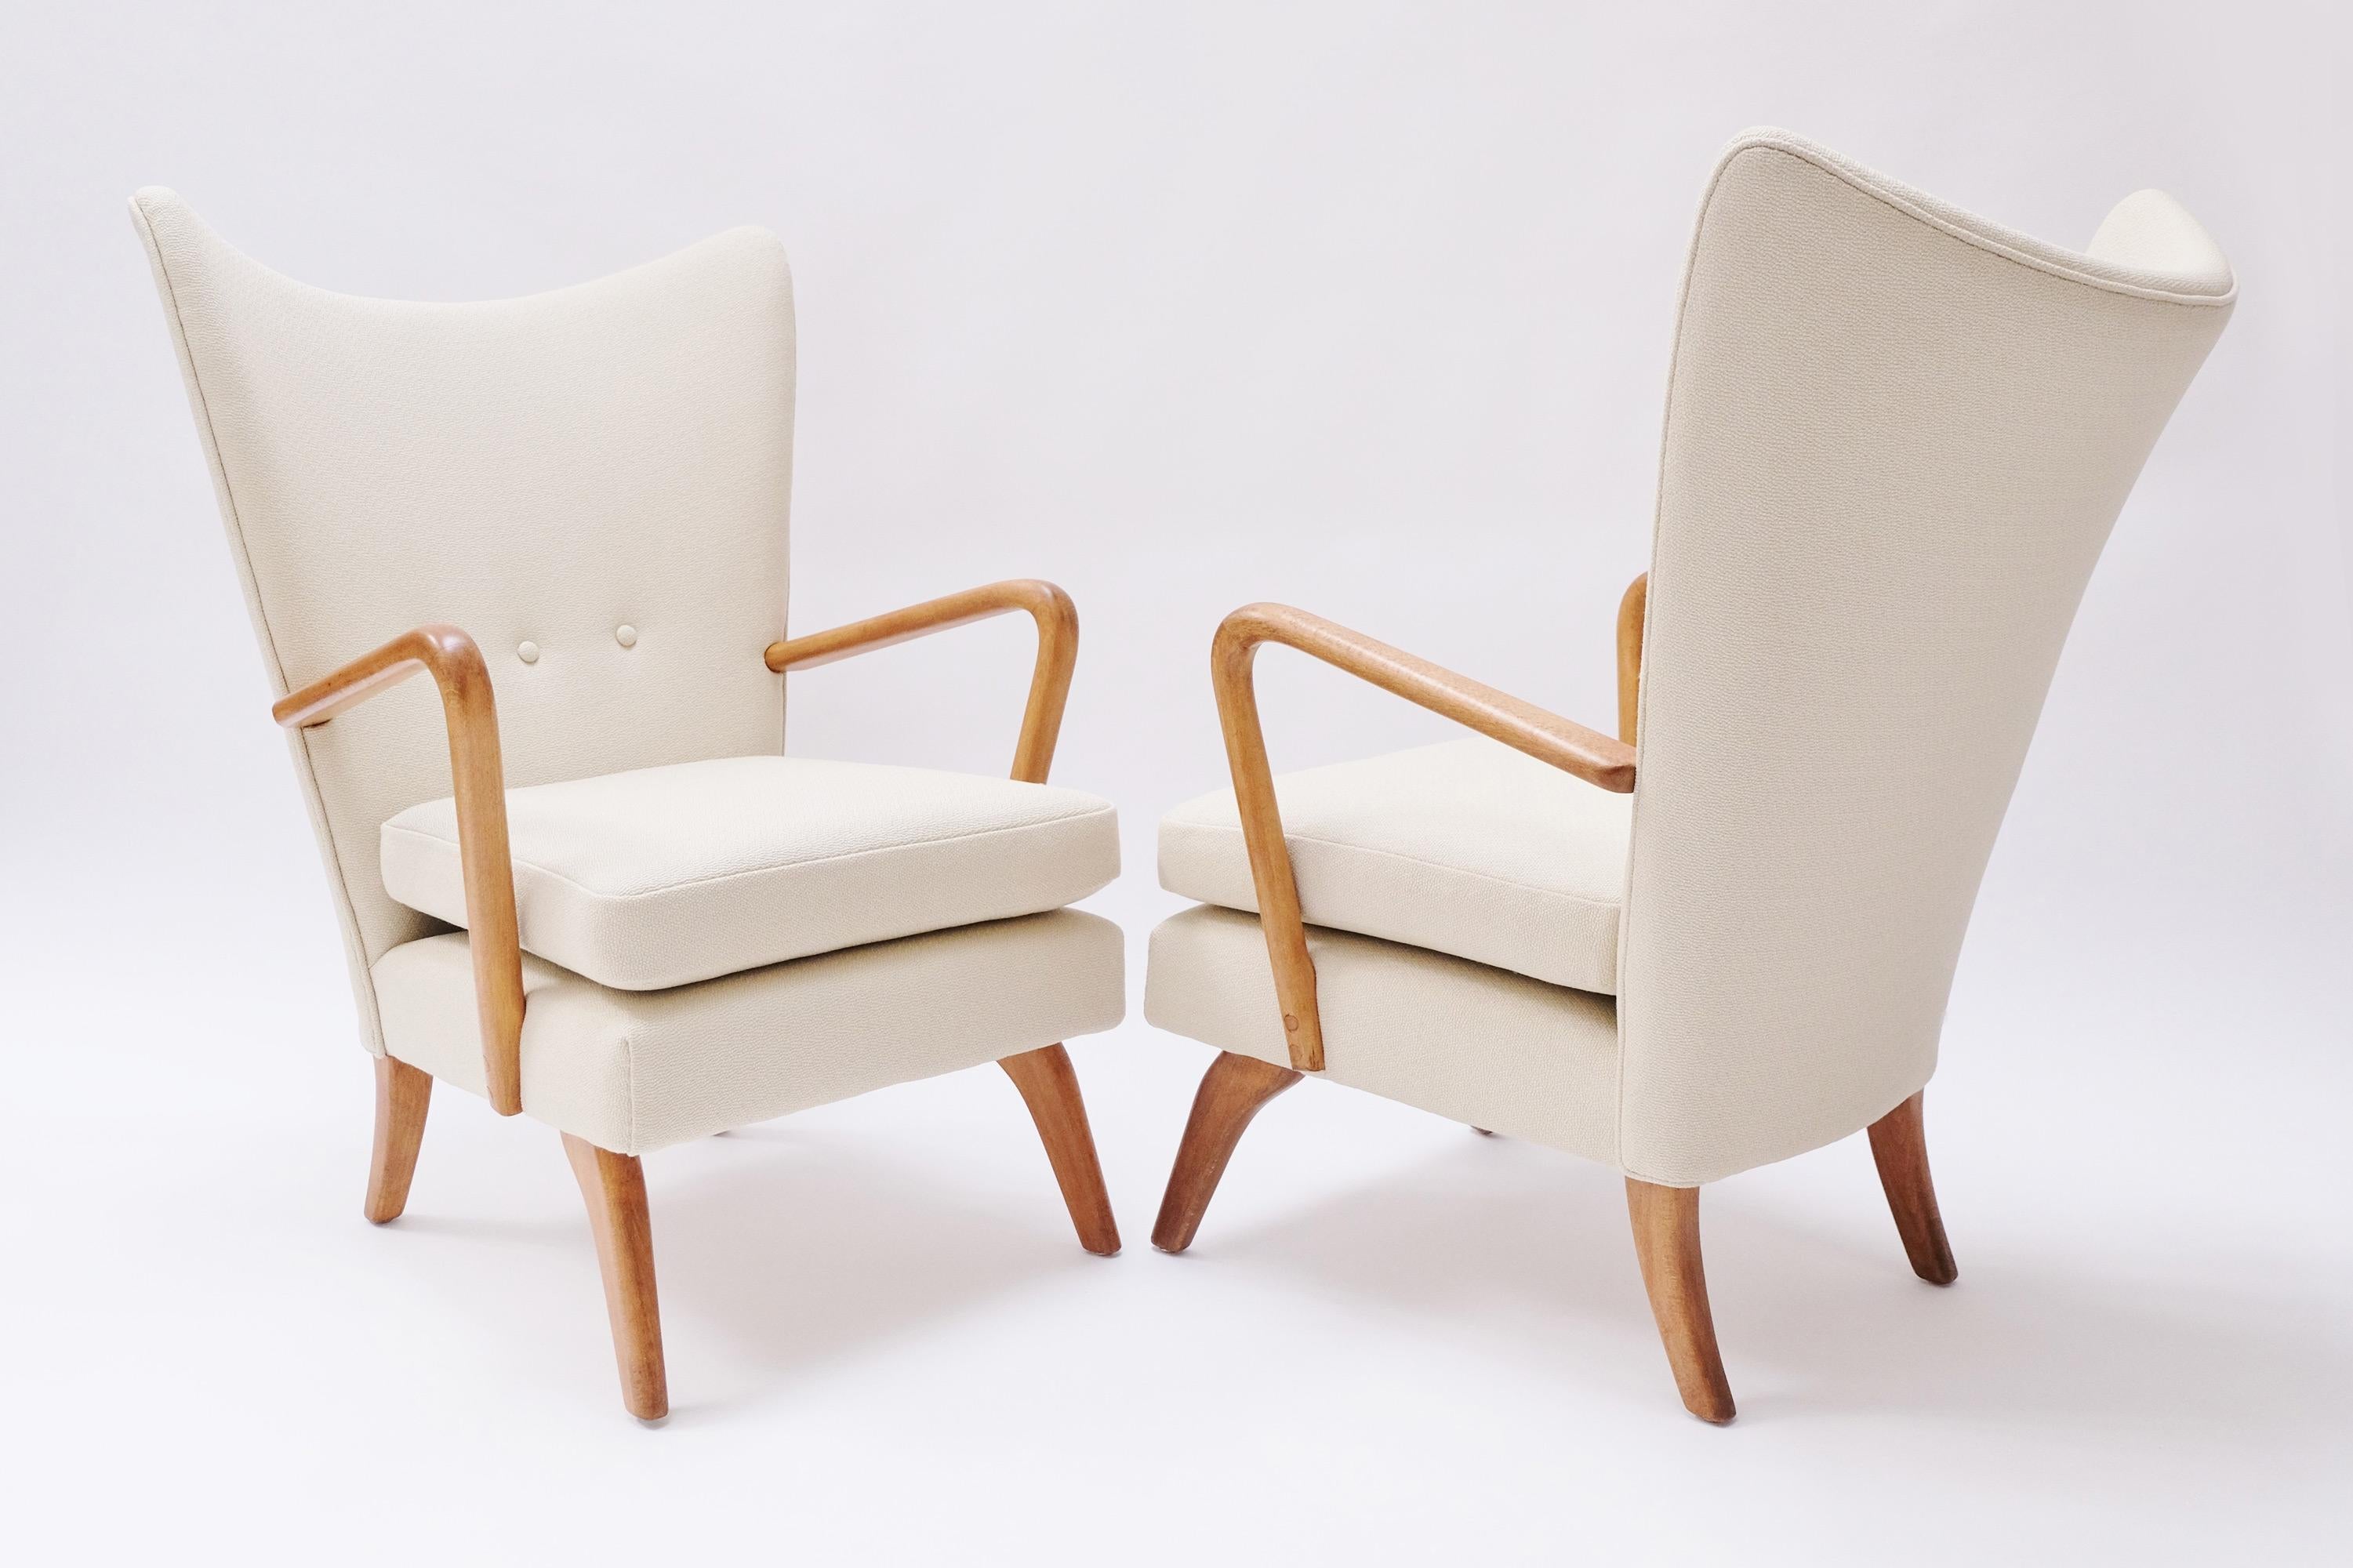 Mid-20th Century Mid-Century Bambino Wingback Armchair by Howard Keith, 1950s, England For Sale